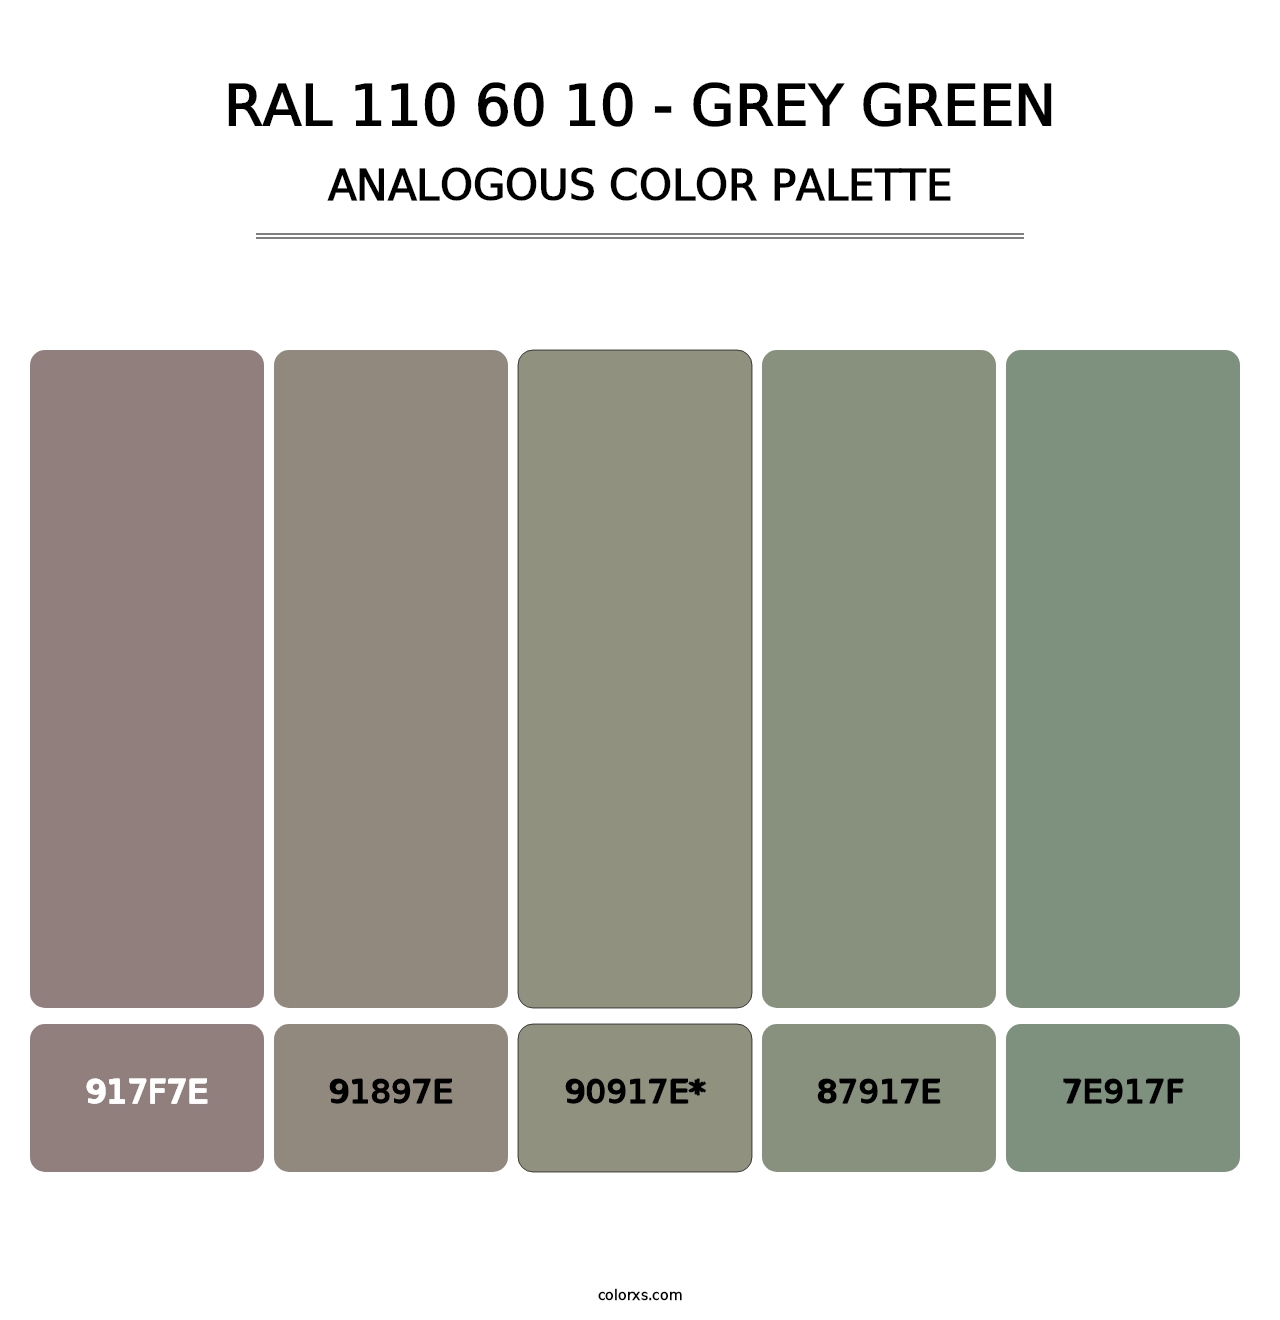 RAL 110 60 10 - Grey Green - Analogous Color Palette